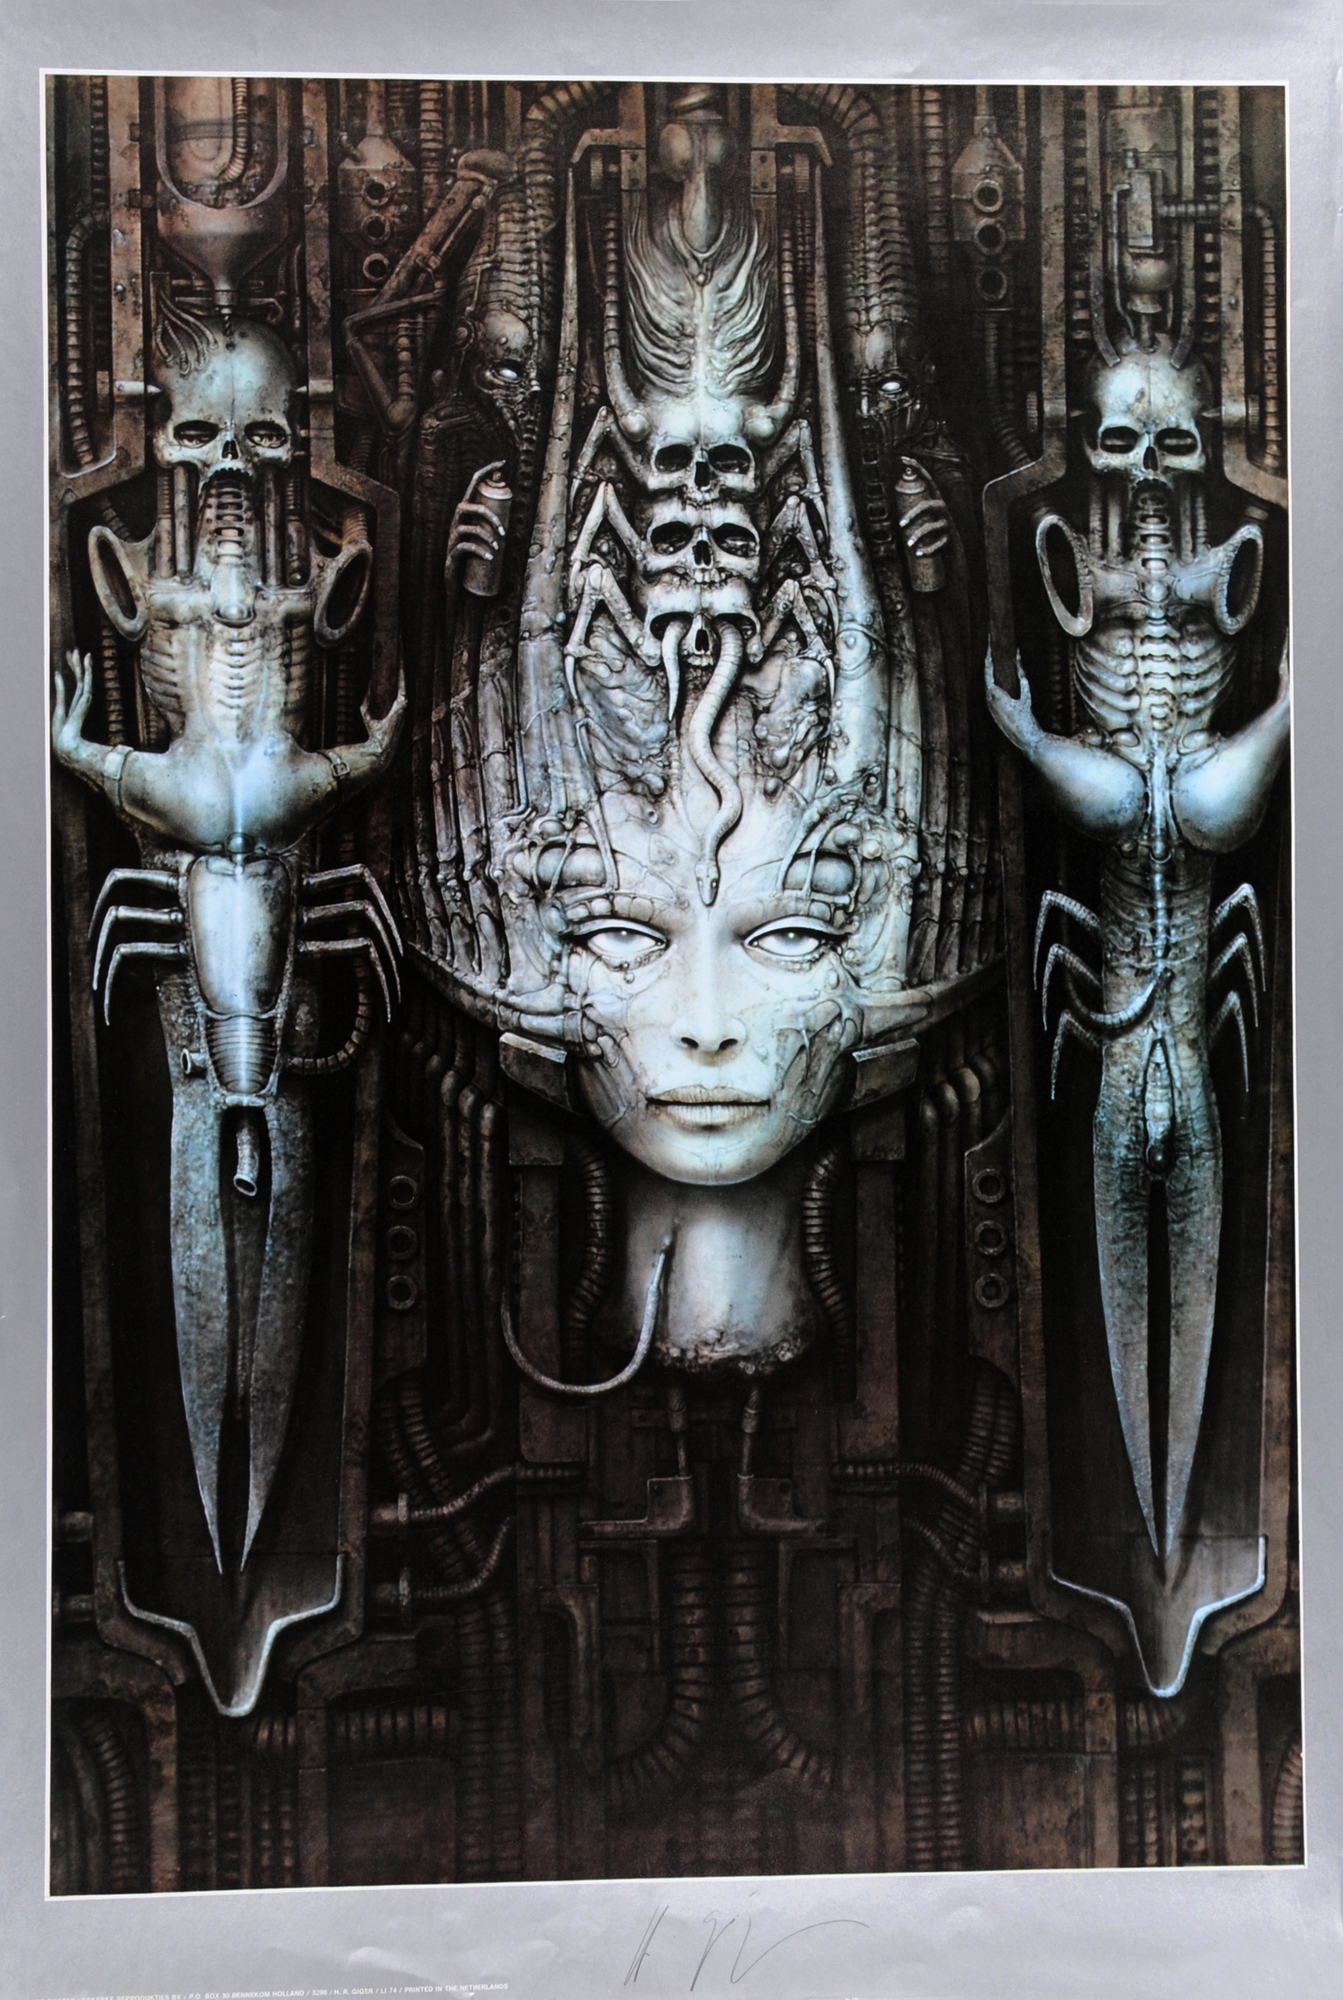 Artwork by H. R. Giger, Biomechanical Landscape IIa, Made of Photogravure